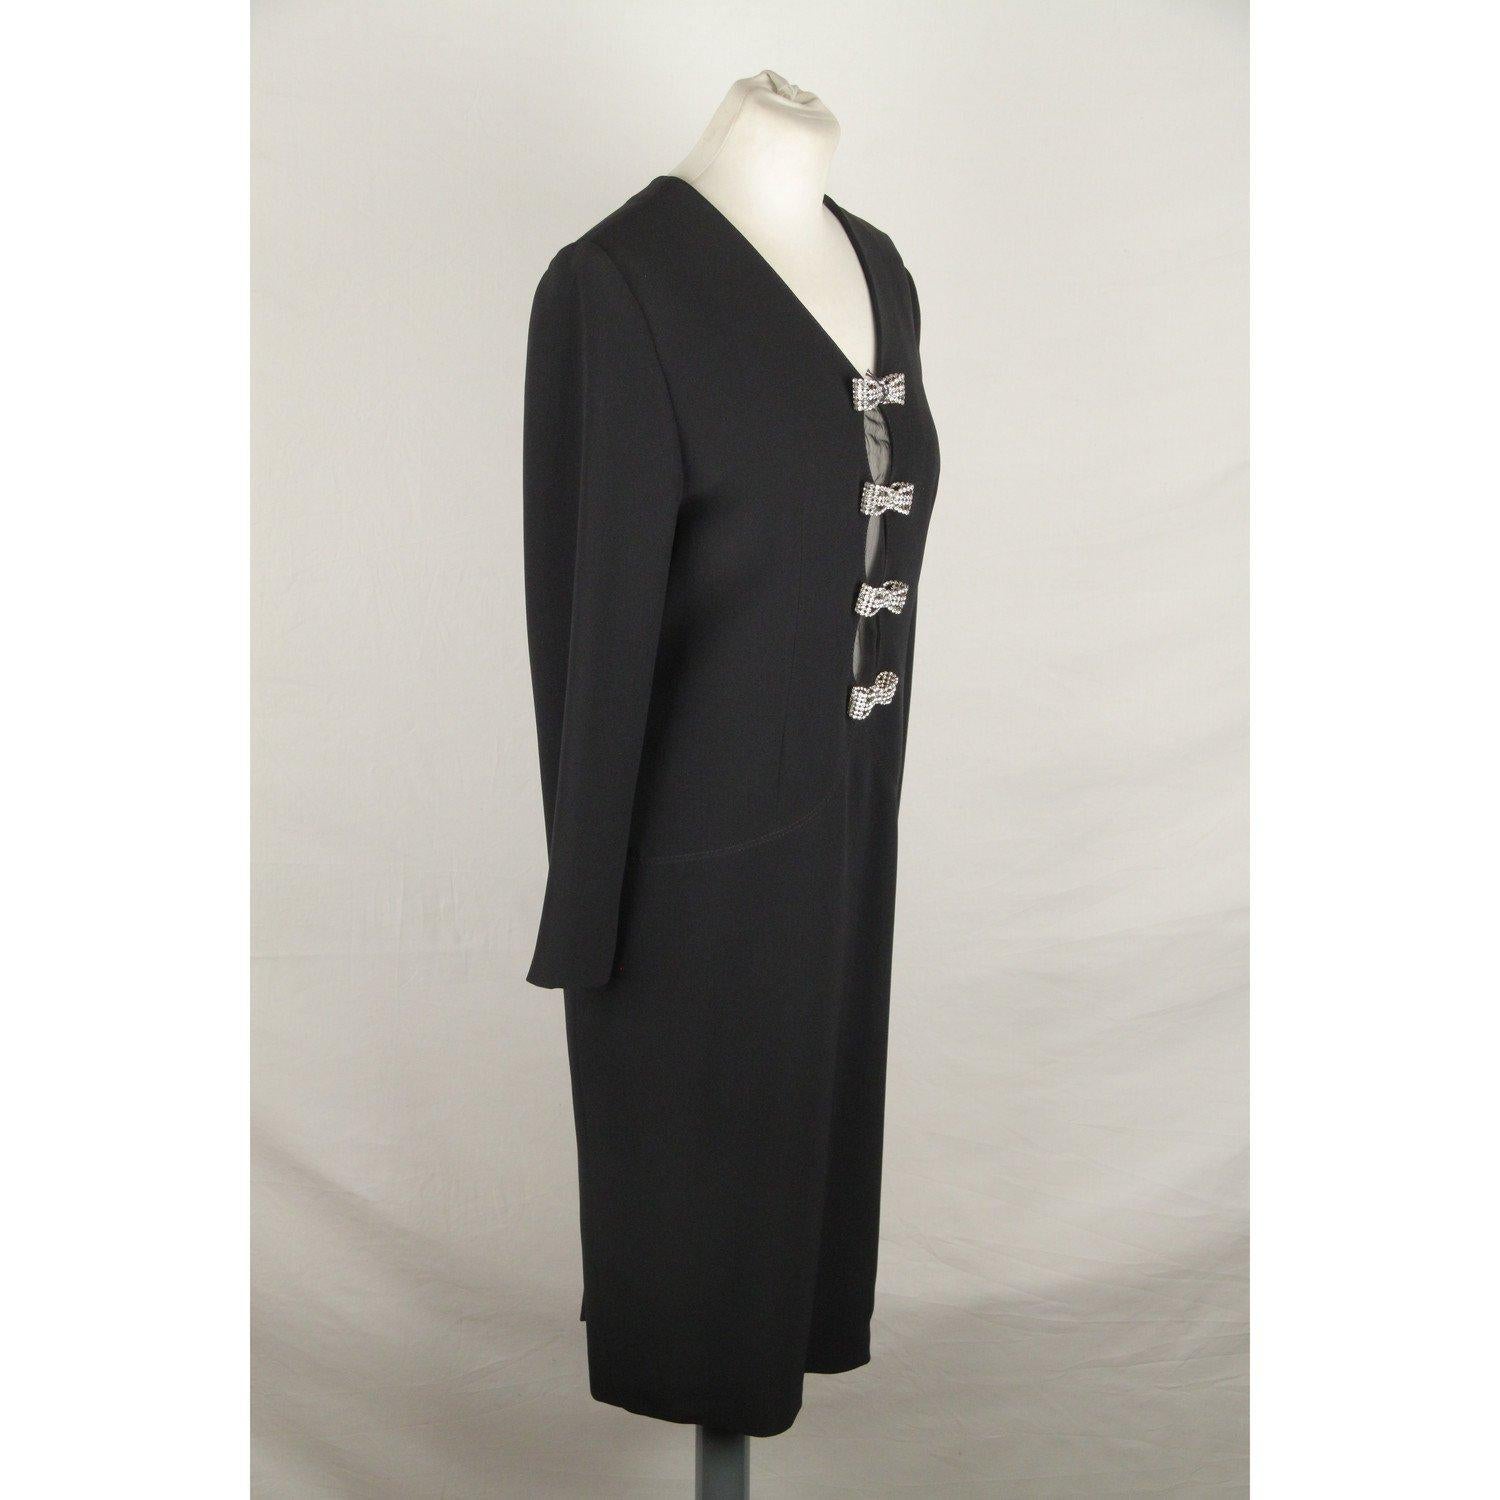 MATERIAL: Acetate COLOR: Black MODEL: Little Black Dress GENDER: Women SIZE: Medium CONDITION RATING: A :EXCELLENT CONDITION - Used once or twice. Looks mint. Imperceptible signs of wear CONDITION DETAILS: Gently used MEASUREMENTS: SHOULDER TO